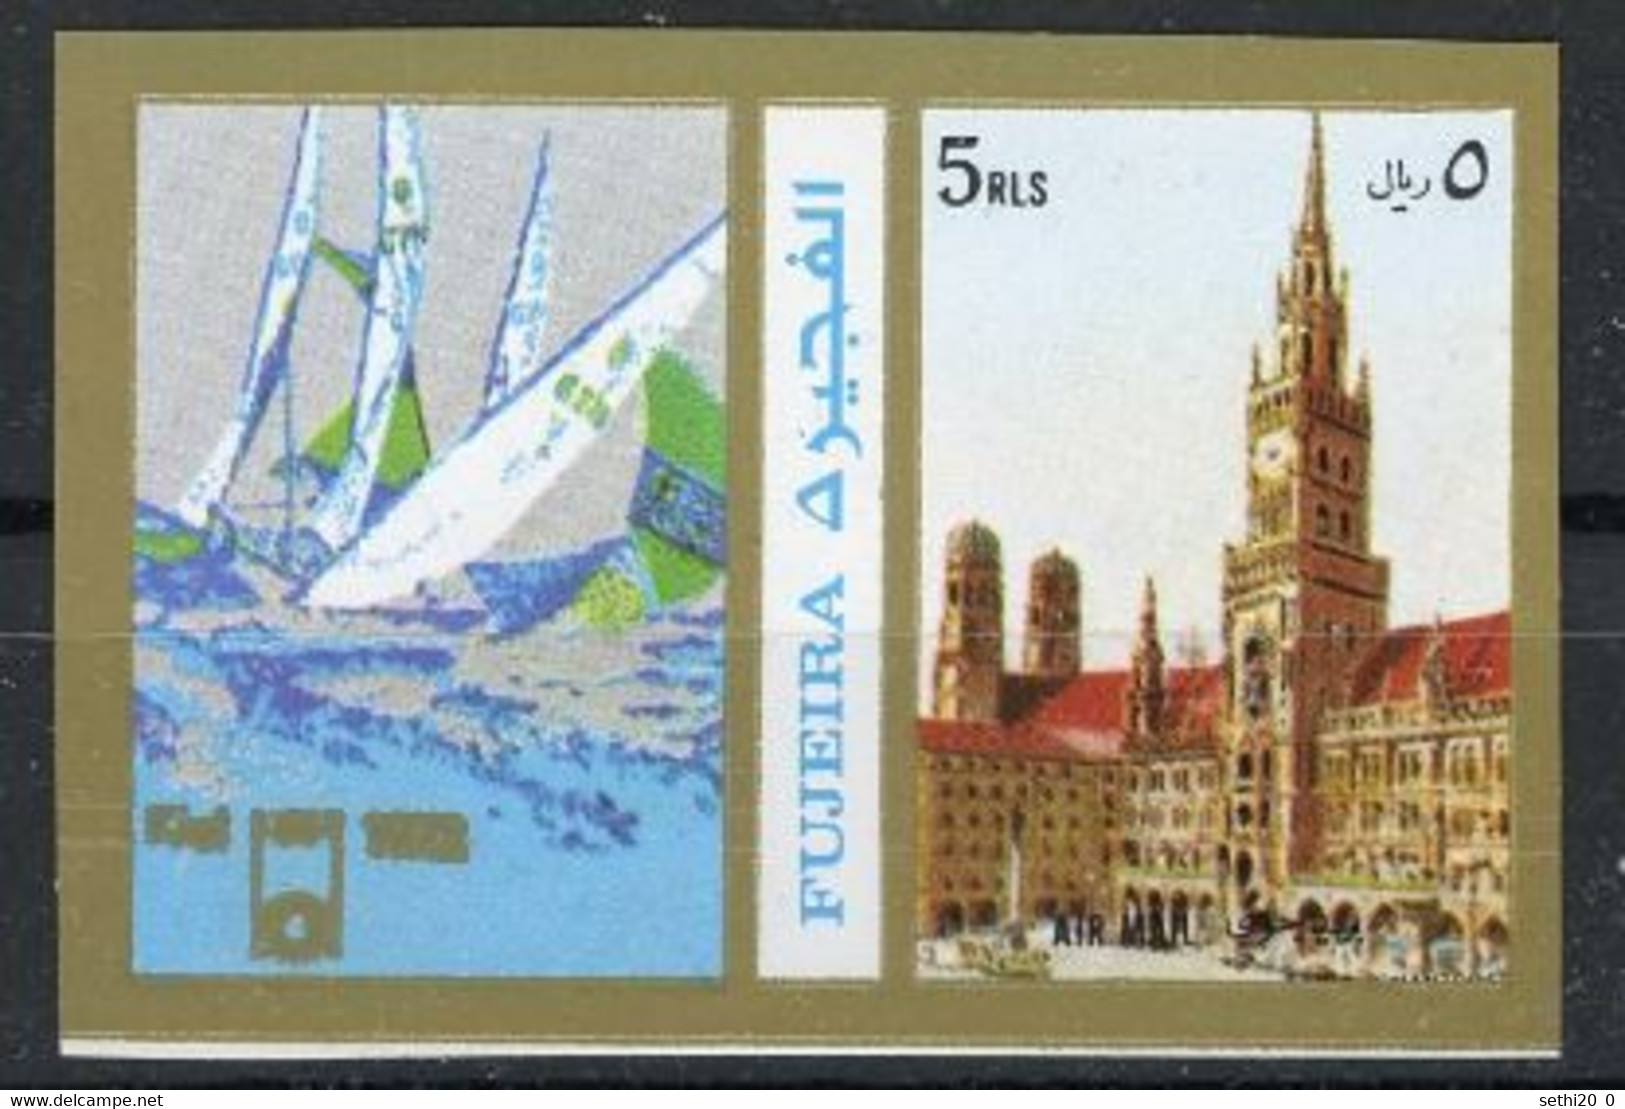 Fujeira 1968 Voile Imperf  MNH - Verano 1904: St-Louis